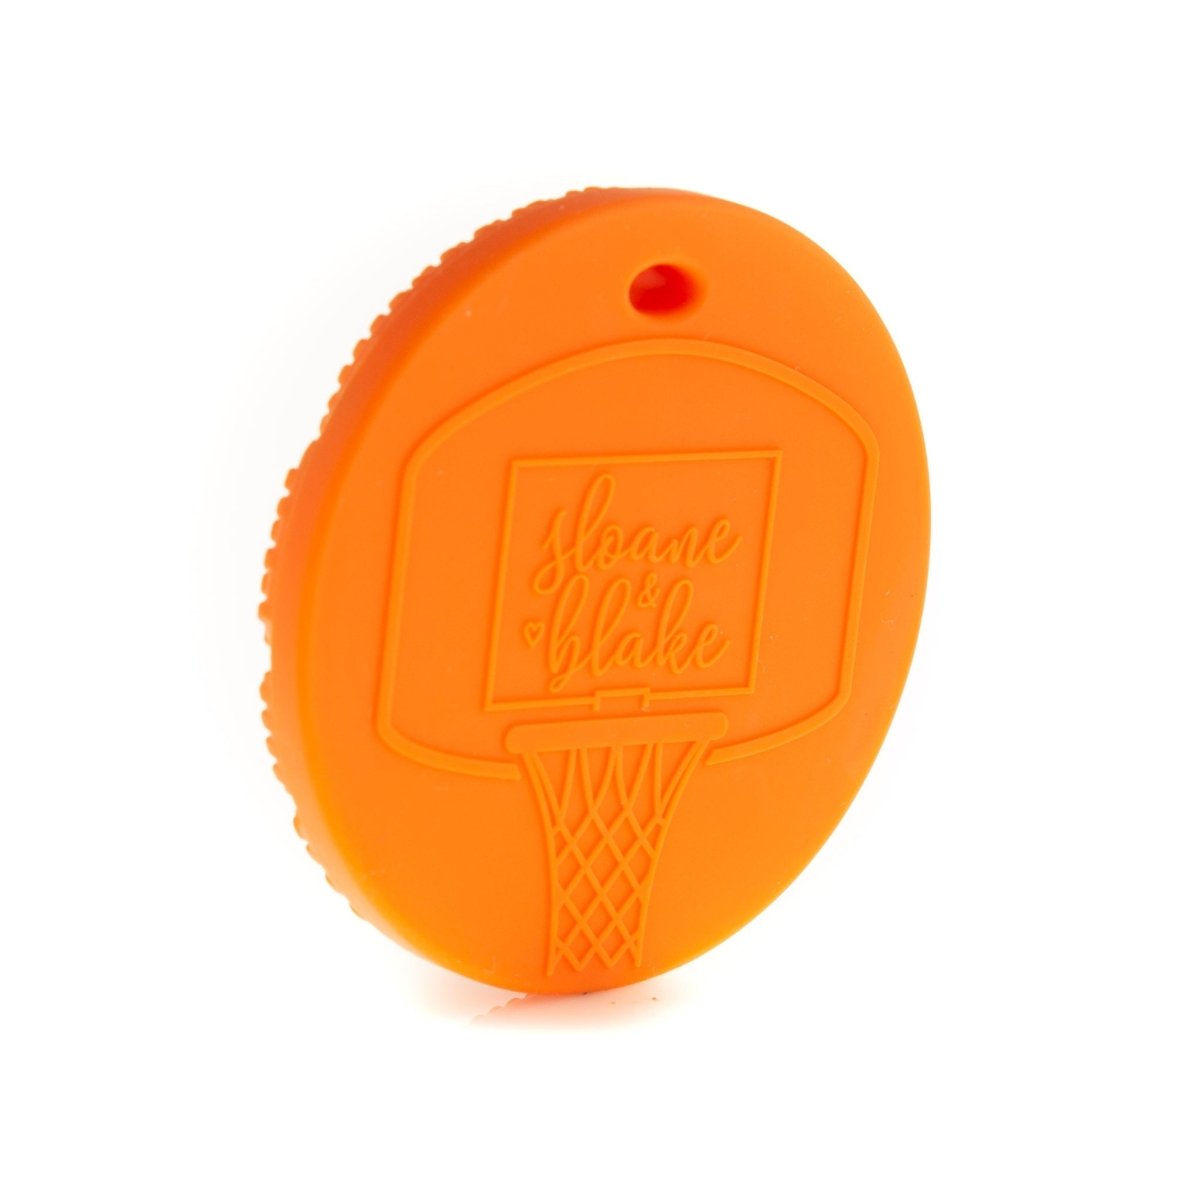 Silicone Teethers and Pendants Basketballs from Cara & Co Craft Supply